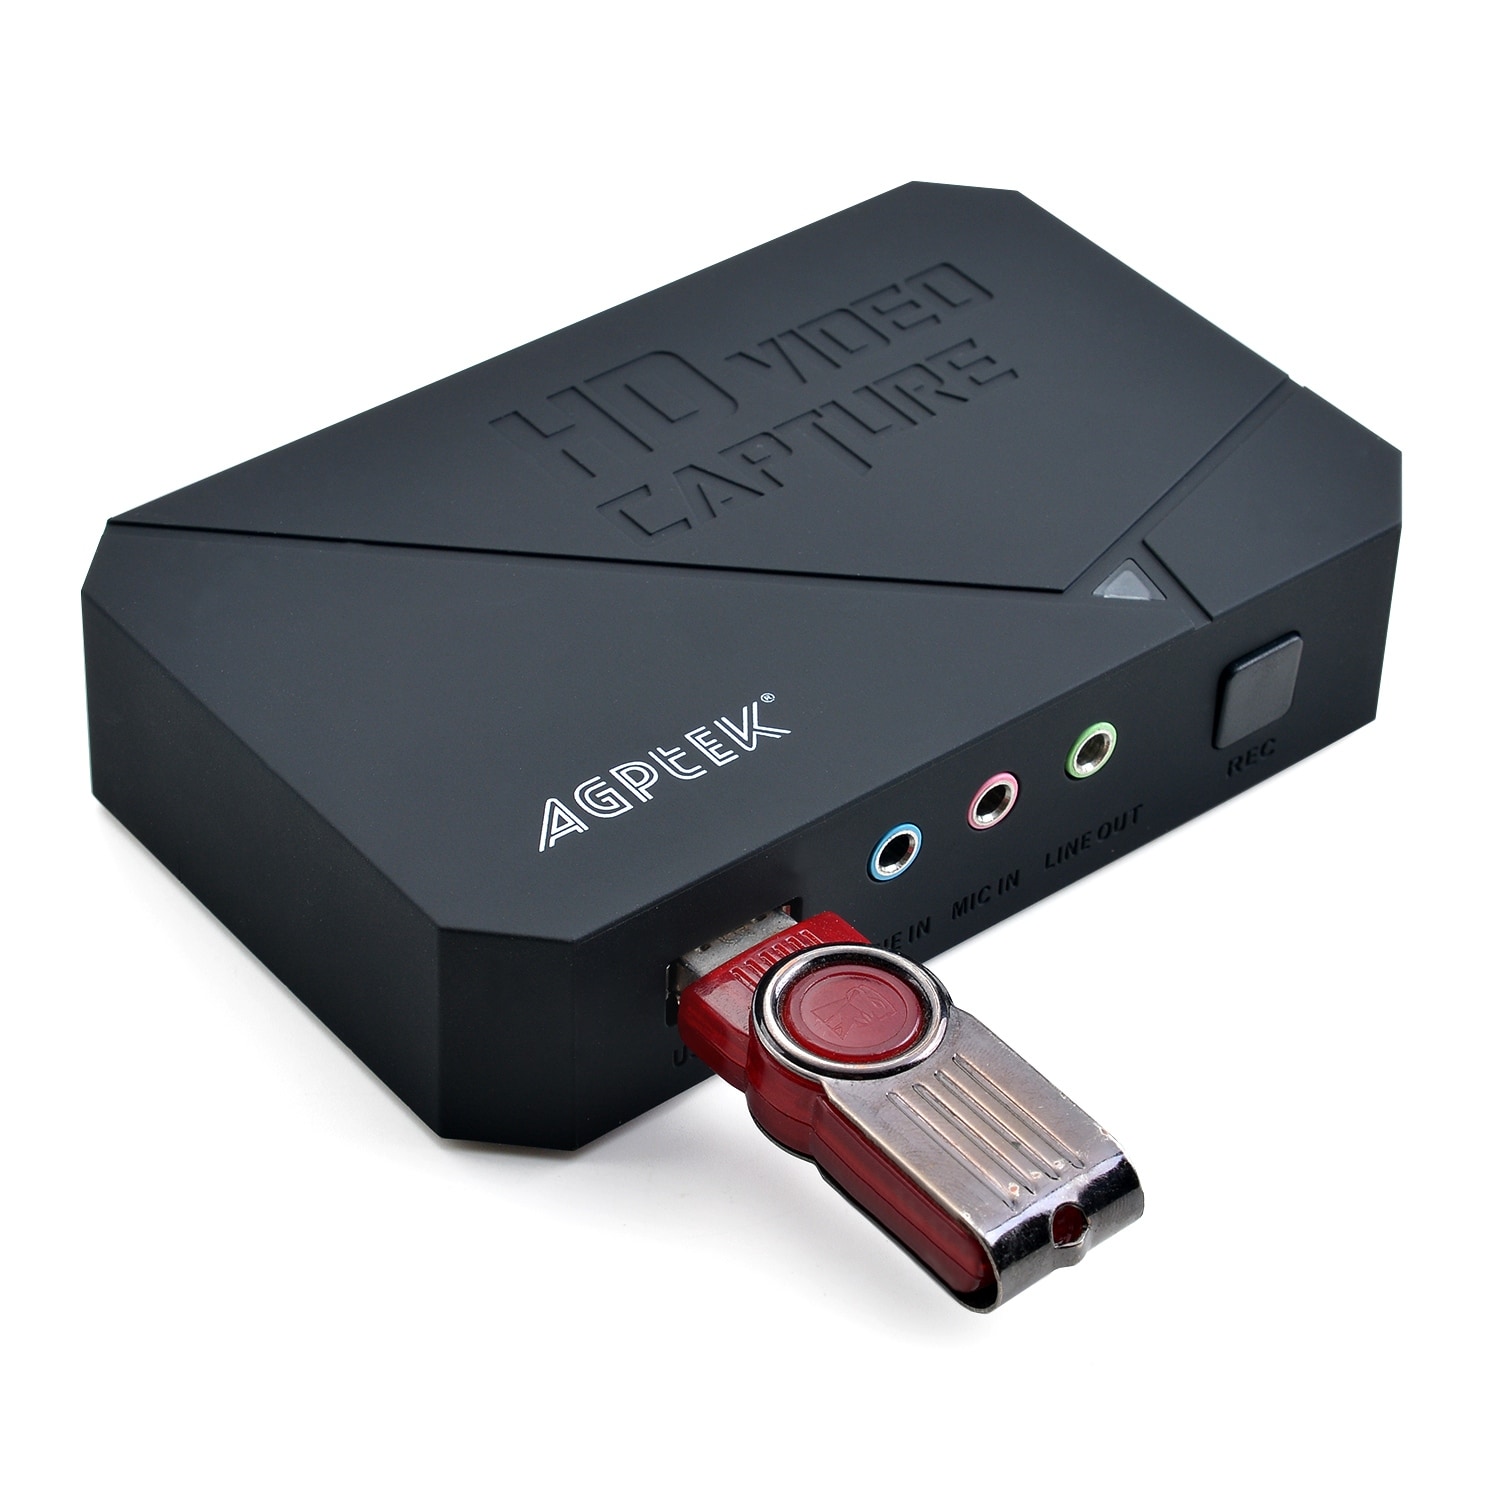 agptek hd game capture video capture 1080p hdmi/ypbpr recorder xbox 360&one/ ps for mac